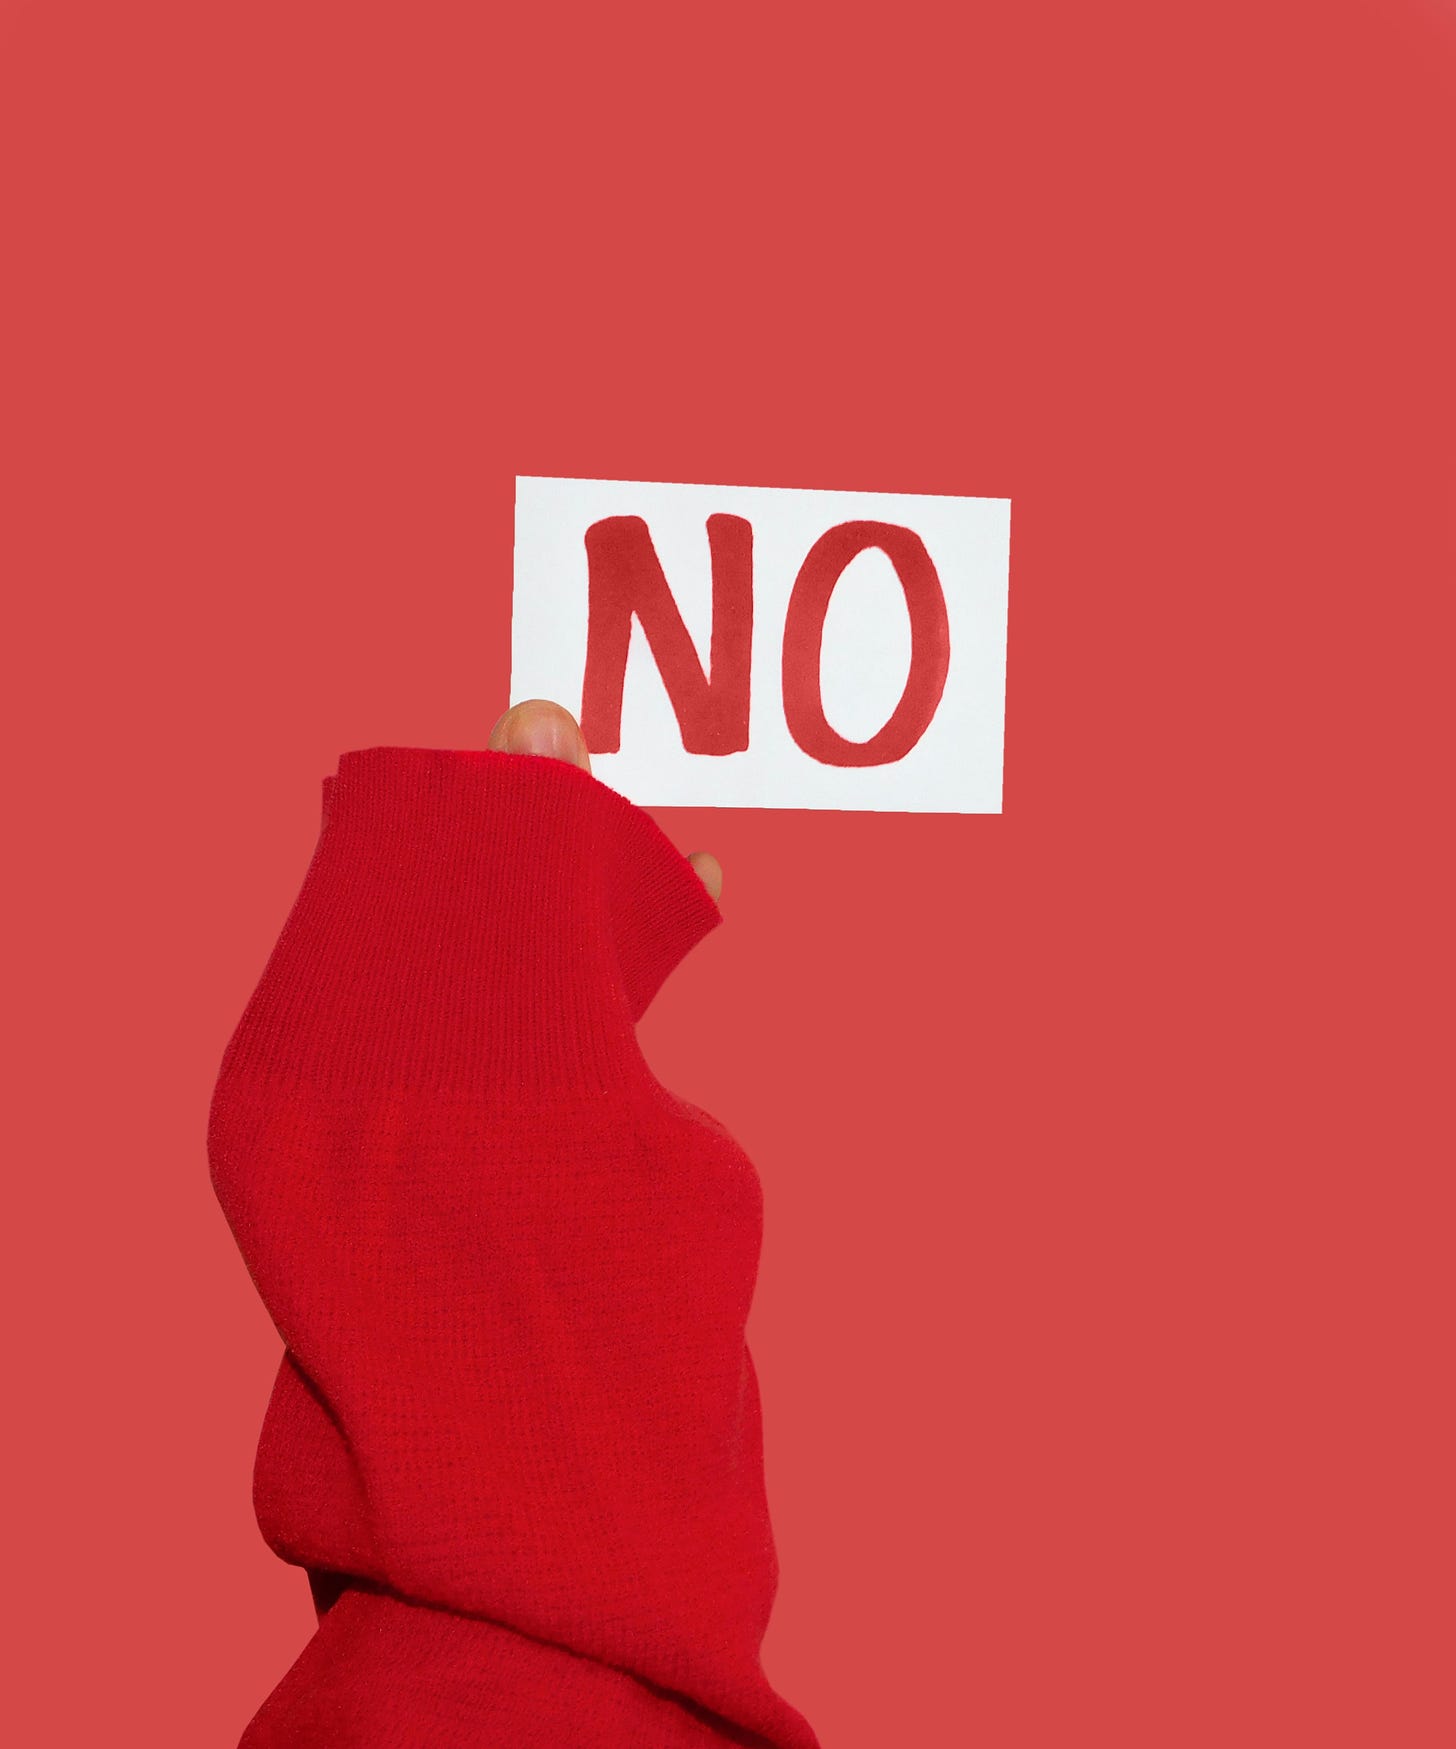 A hand in a read sweater, holds up a white card with the word “no” in red ink, against a red background. 